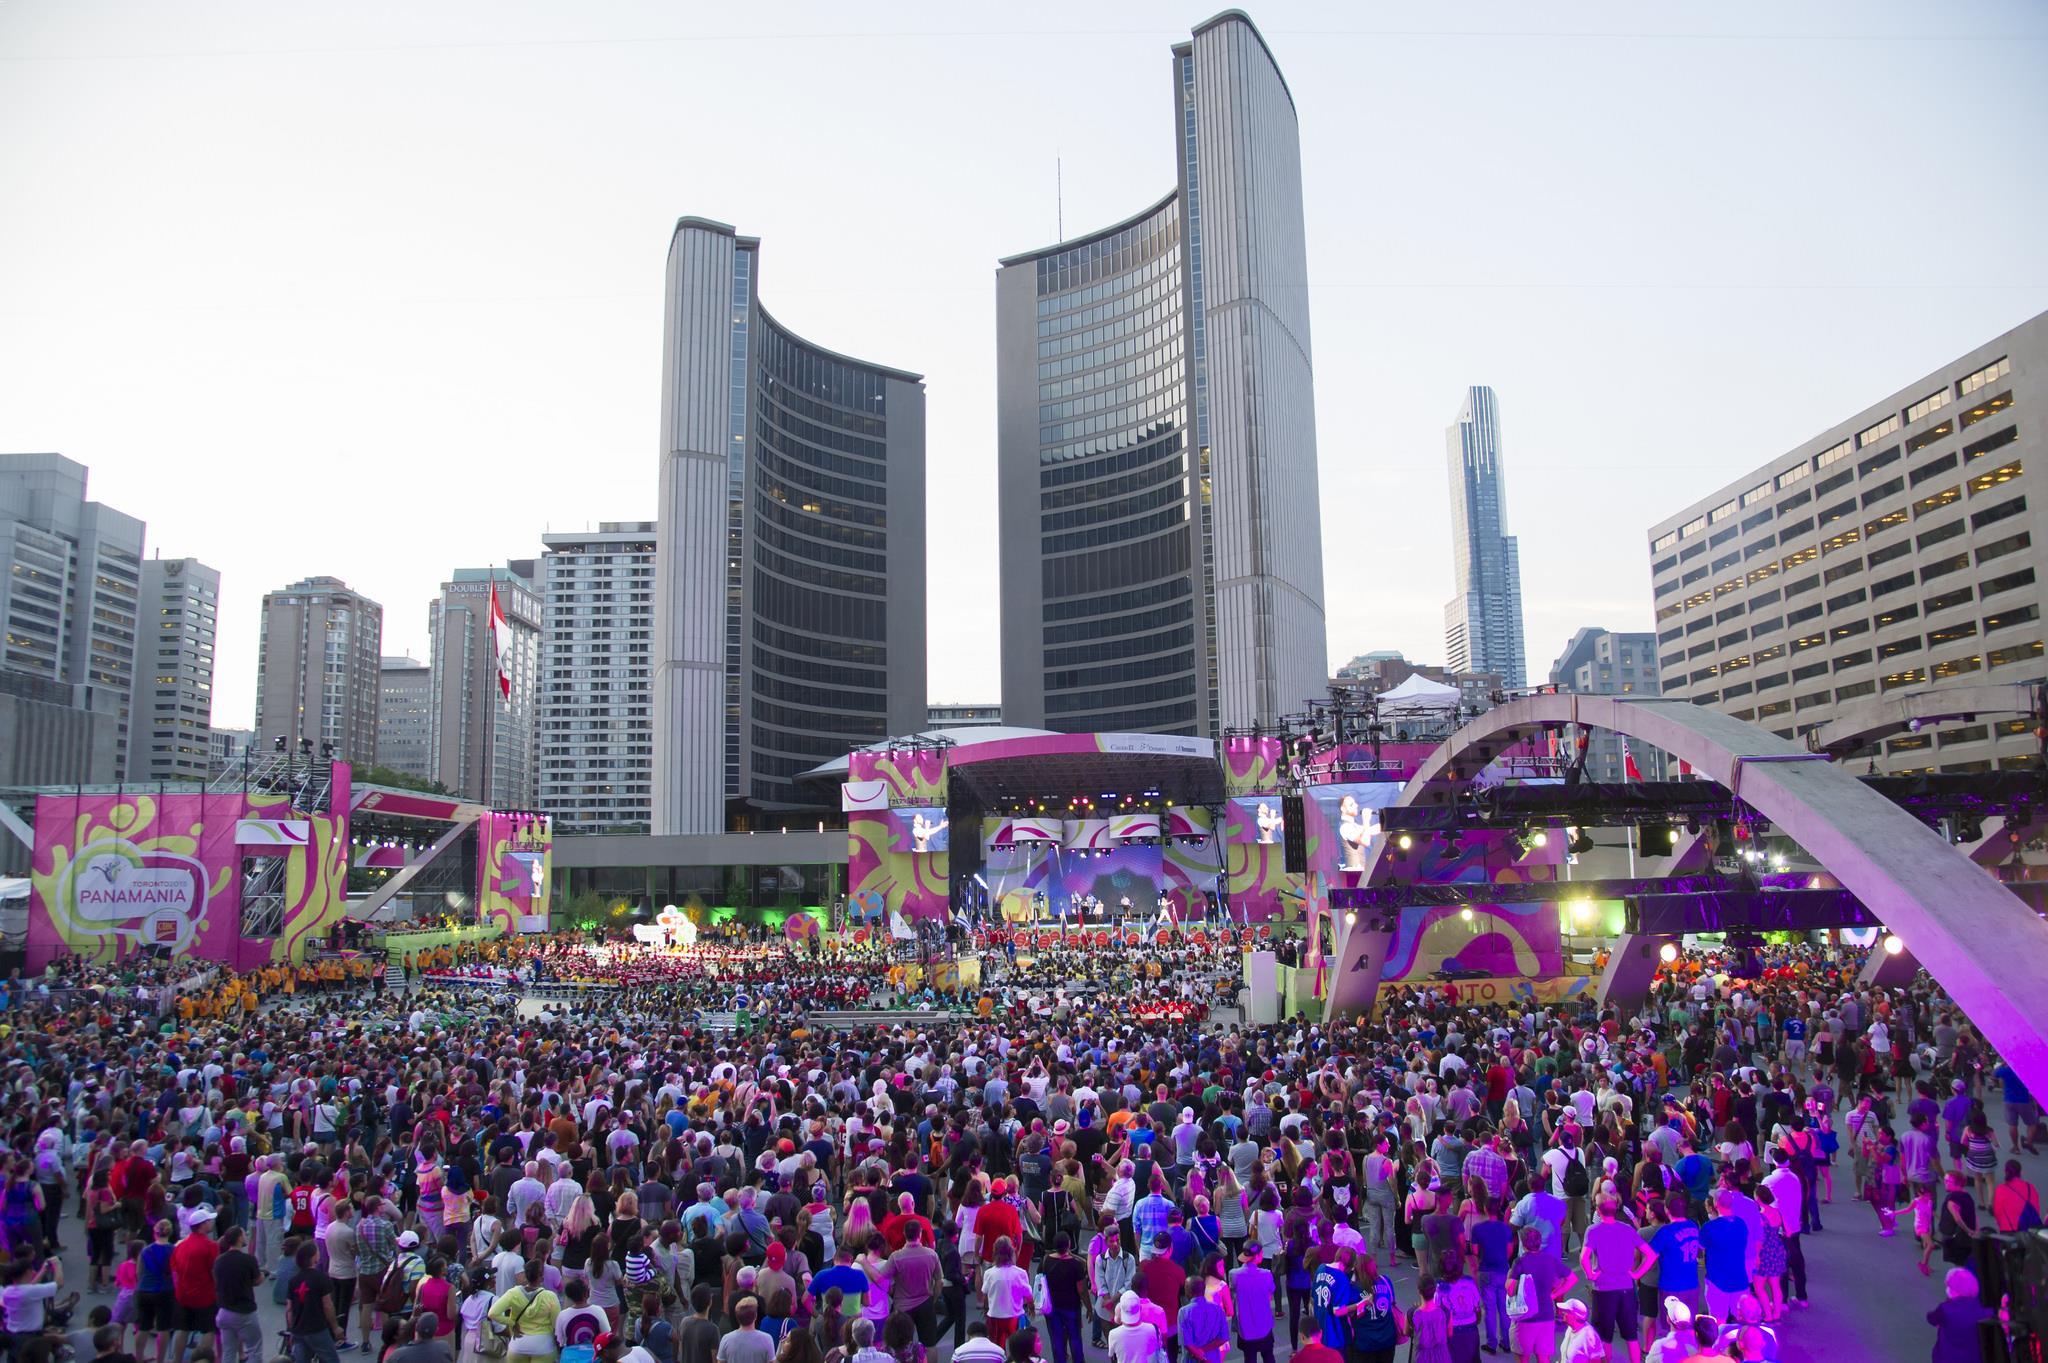 Large crowds gathered at Nathan Philips Square